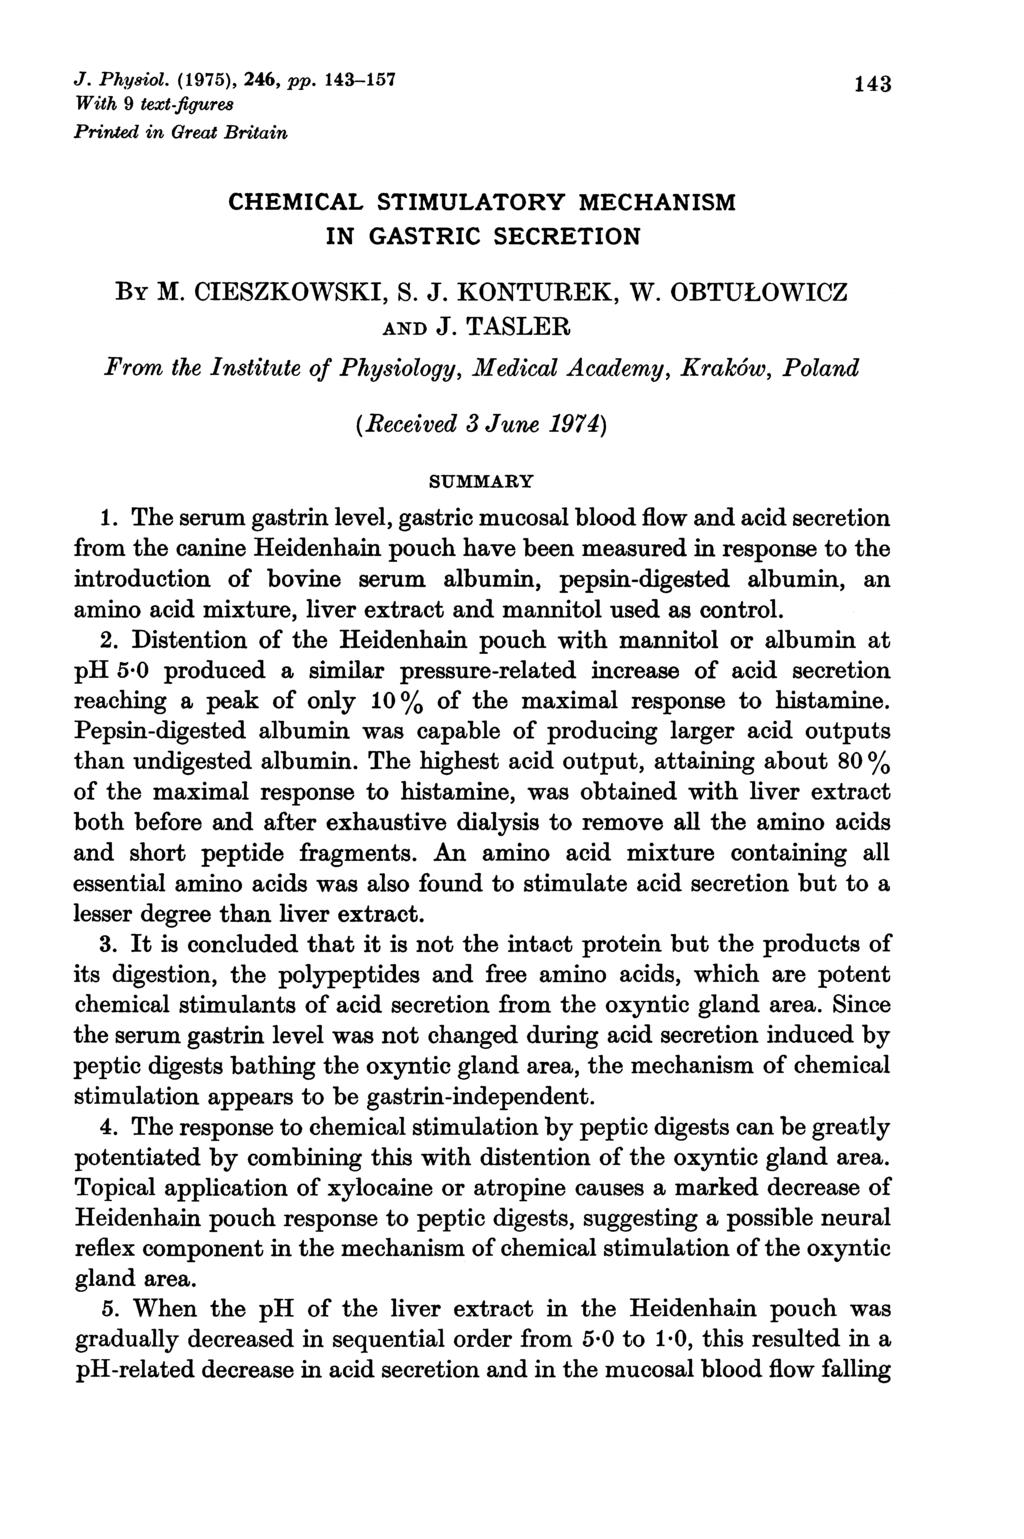 J. Phkyiol. (1975), 246, pp. 143-157 143 With 9 text-ftgure Printed in Great Britain HMIAL STIMULATORY MHANISM IN GASTRI SRTION By M. ISZKOWSKI, S. J. KONTURK, W. OBTULOWIZ AND J.